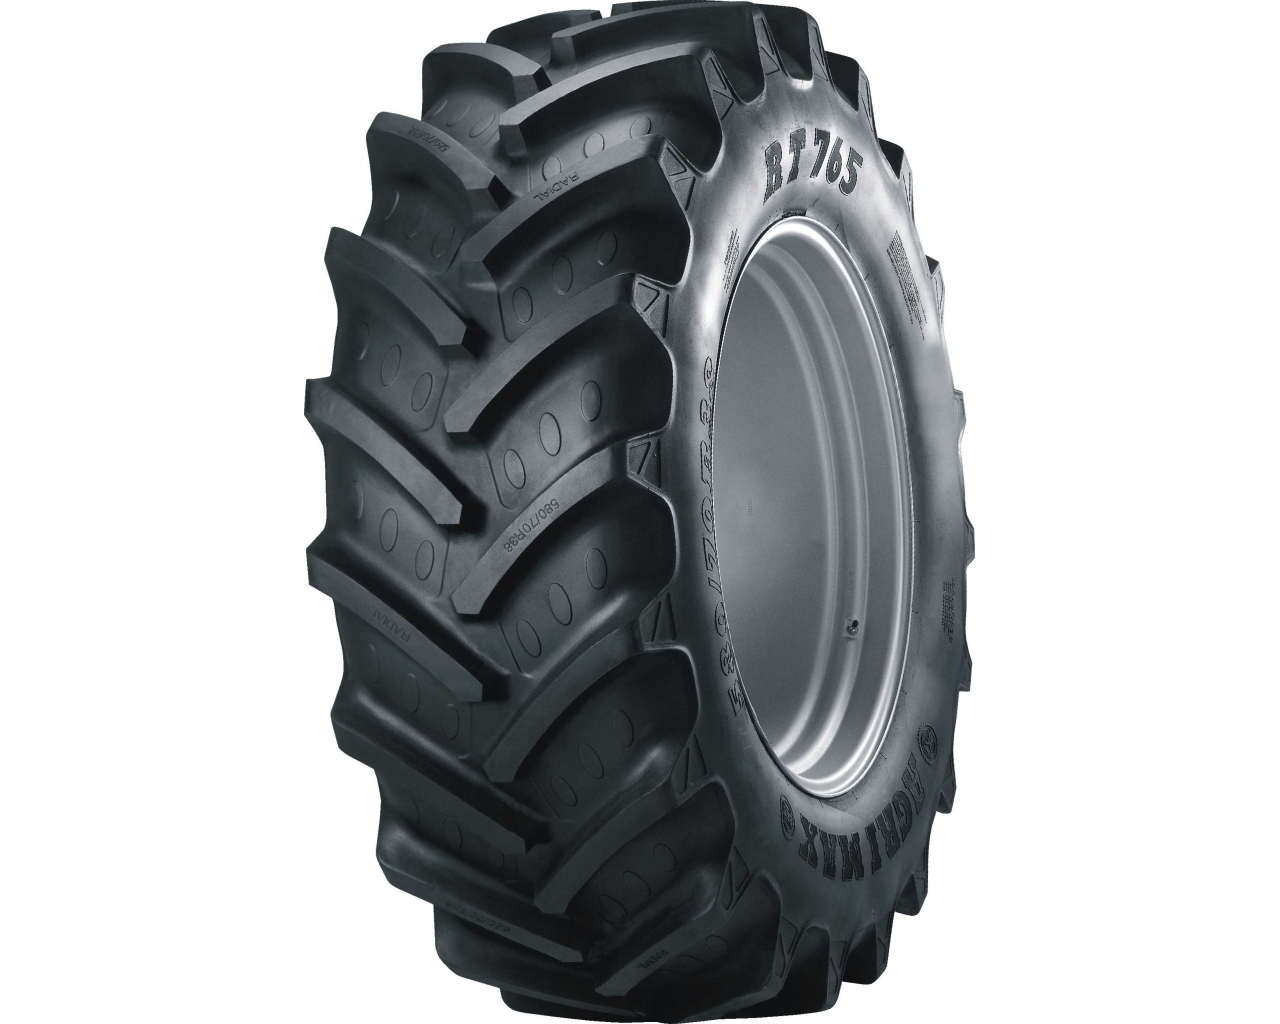 Шина 520/70R34 BKT AGRIMAX RT-765 148A8 TL